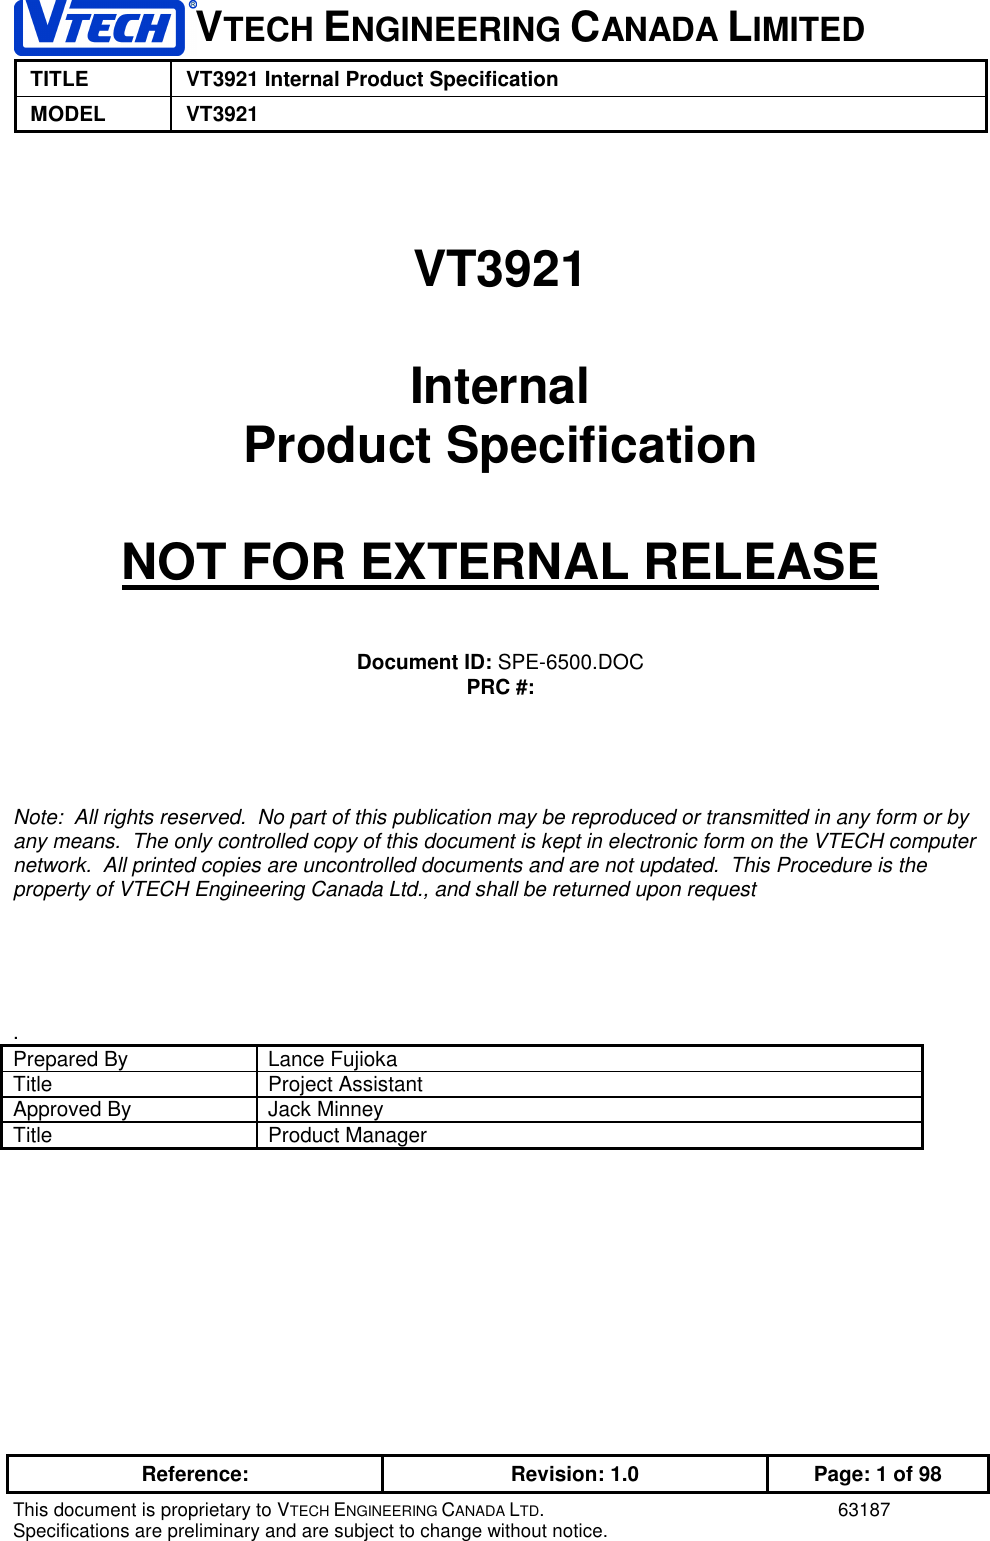 VTECH ENGINEERING CANADA LIMITEDTITLE VT3921 Internal Product SpecificationMODEL VT3921Reference: Revision: 1.0 Page: 1 of 98This document is proprietary to VTECH ENGINEERING CANADA LTD. 63187Specifications are preliminary and are subject to change without notice.VT3921InternalProduct SpecificationNOT FOR EXTERNAL RELEASEDocument ID: SPE-6500.DOCPRC #:Note:  All rights reserved.  No part of this publication may be reproduced or transmitted in any form or byany means.  The only controlled copy of this document is kept in electronic form on the VTECH computernetwork.  All printed copies are uncontrolled documents and are not updated.  This Procedure is theproperty of VTECH Engineering Canada Ltd., and shall be returned upon request.Prepared By Lance FujiokaTitle Project AssistantApproved By Jack MinneyTitle Product Manager